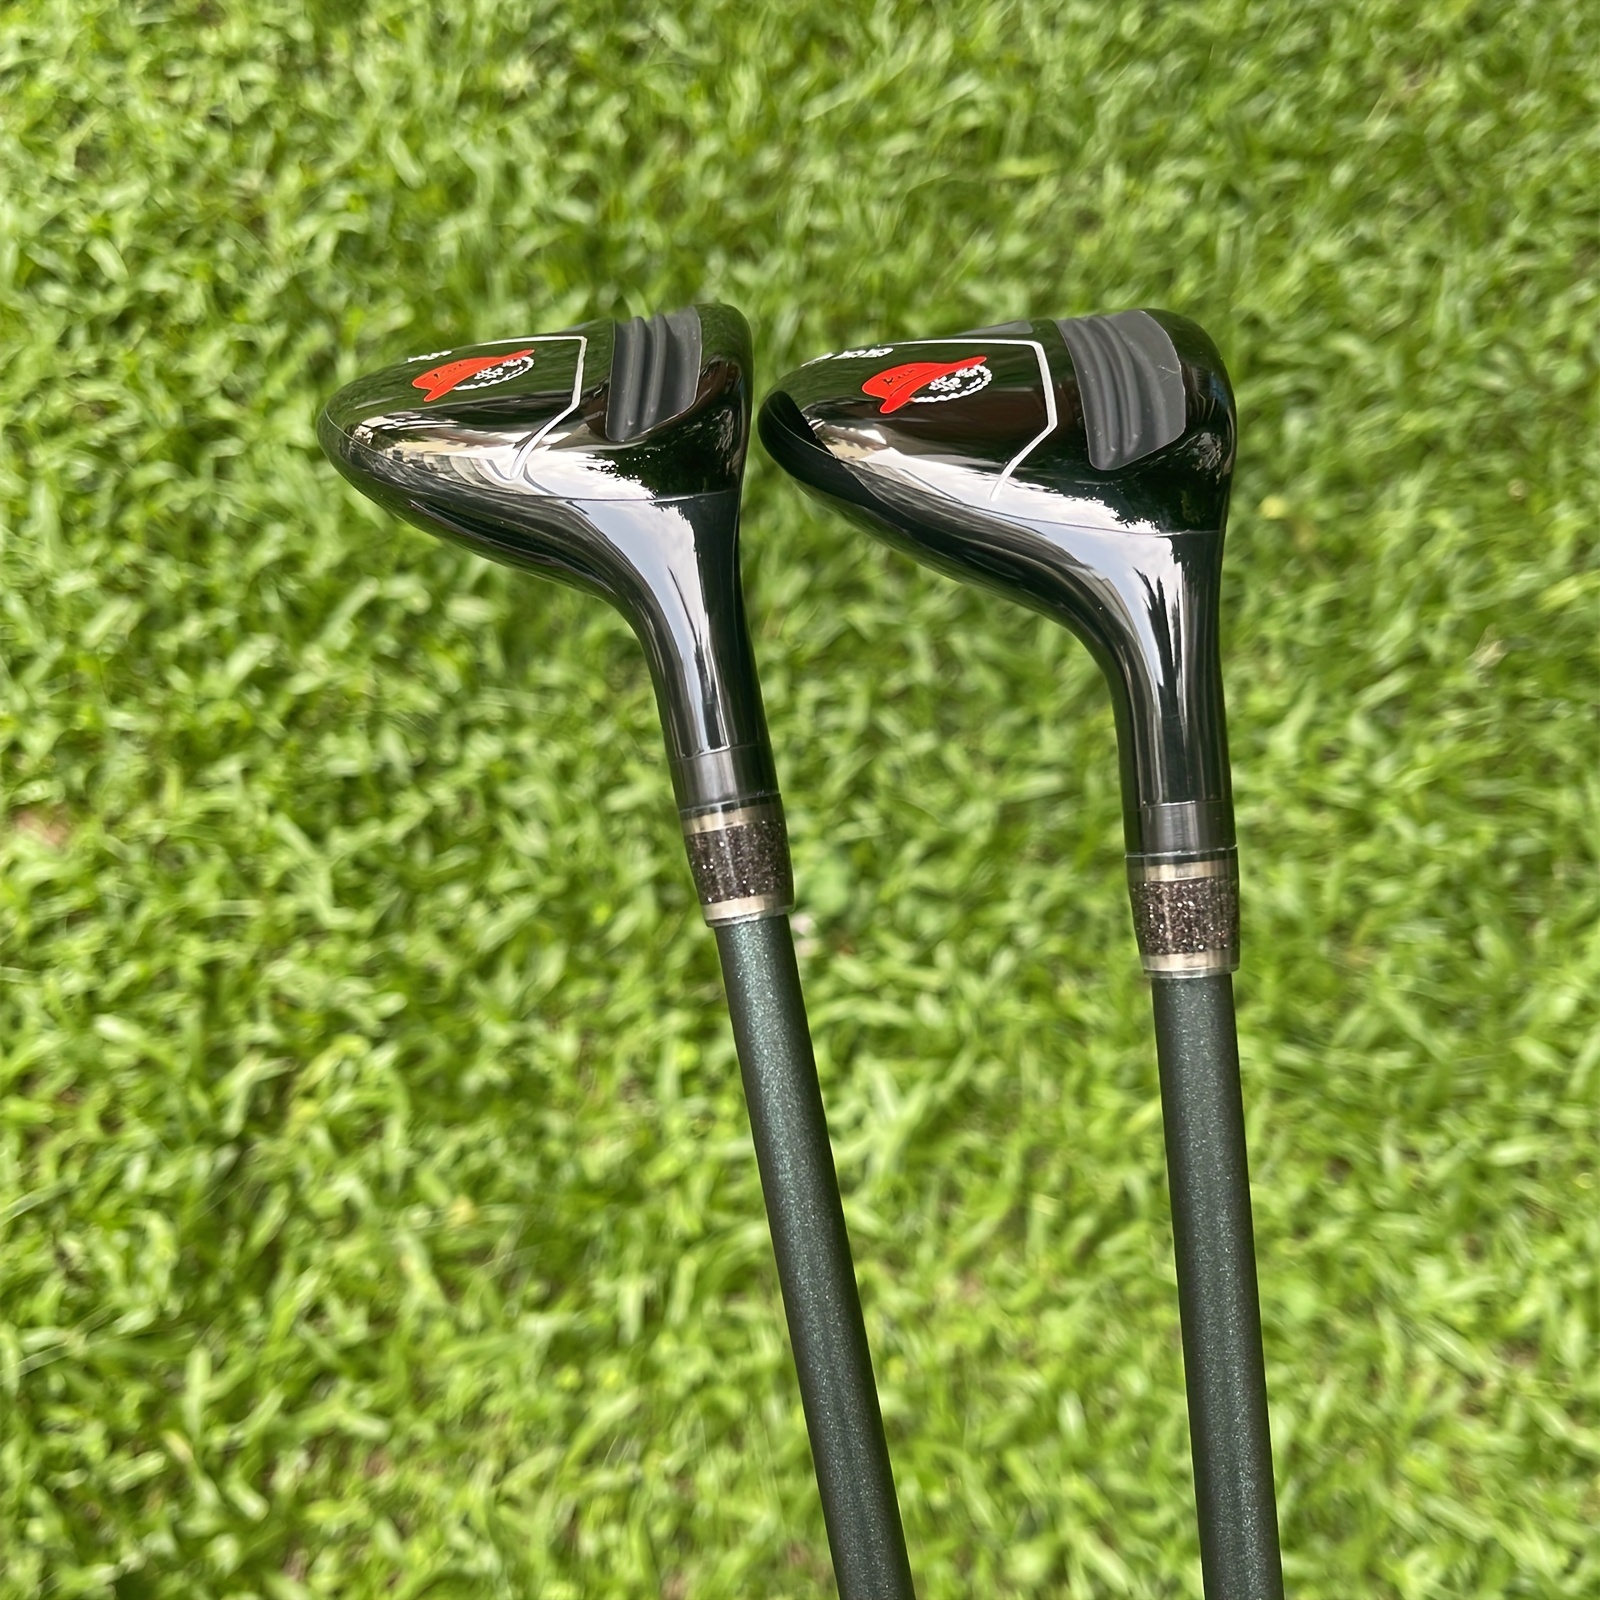 2023 top golf hybrids 19 22 degree graphite shafts with r s l flex headcover perfect for men ladies rescues